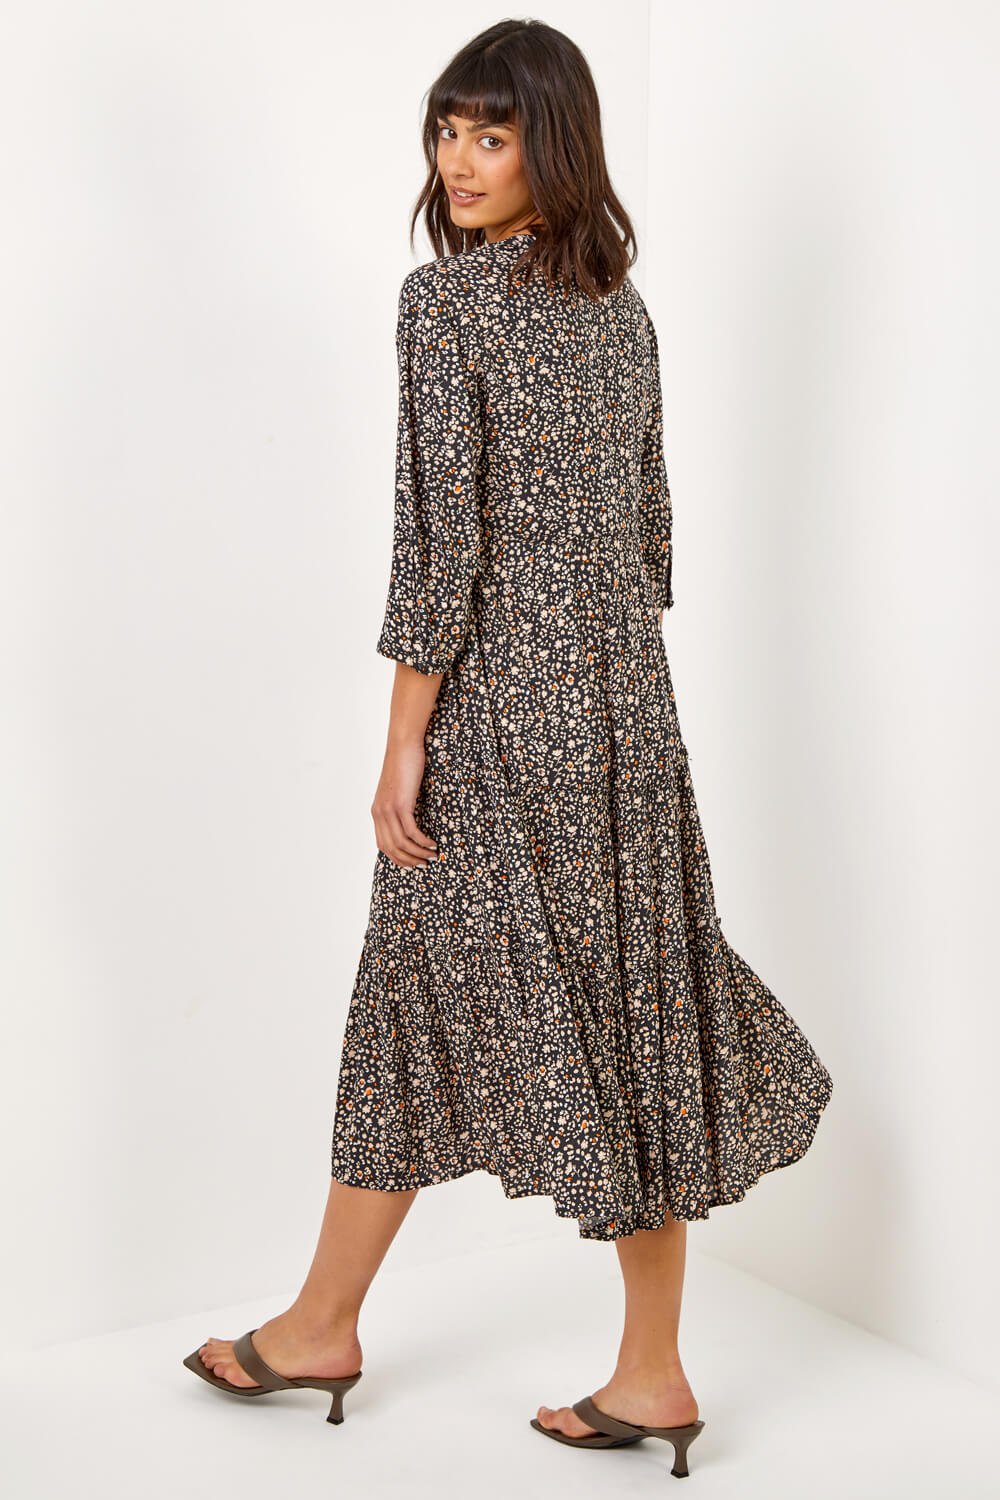 Black Ditsy Floral Tiered Midi Dress, Image 2 of 5